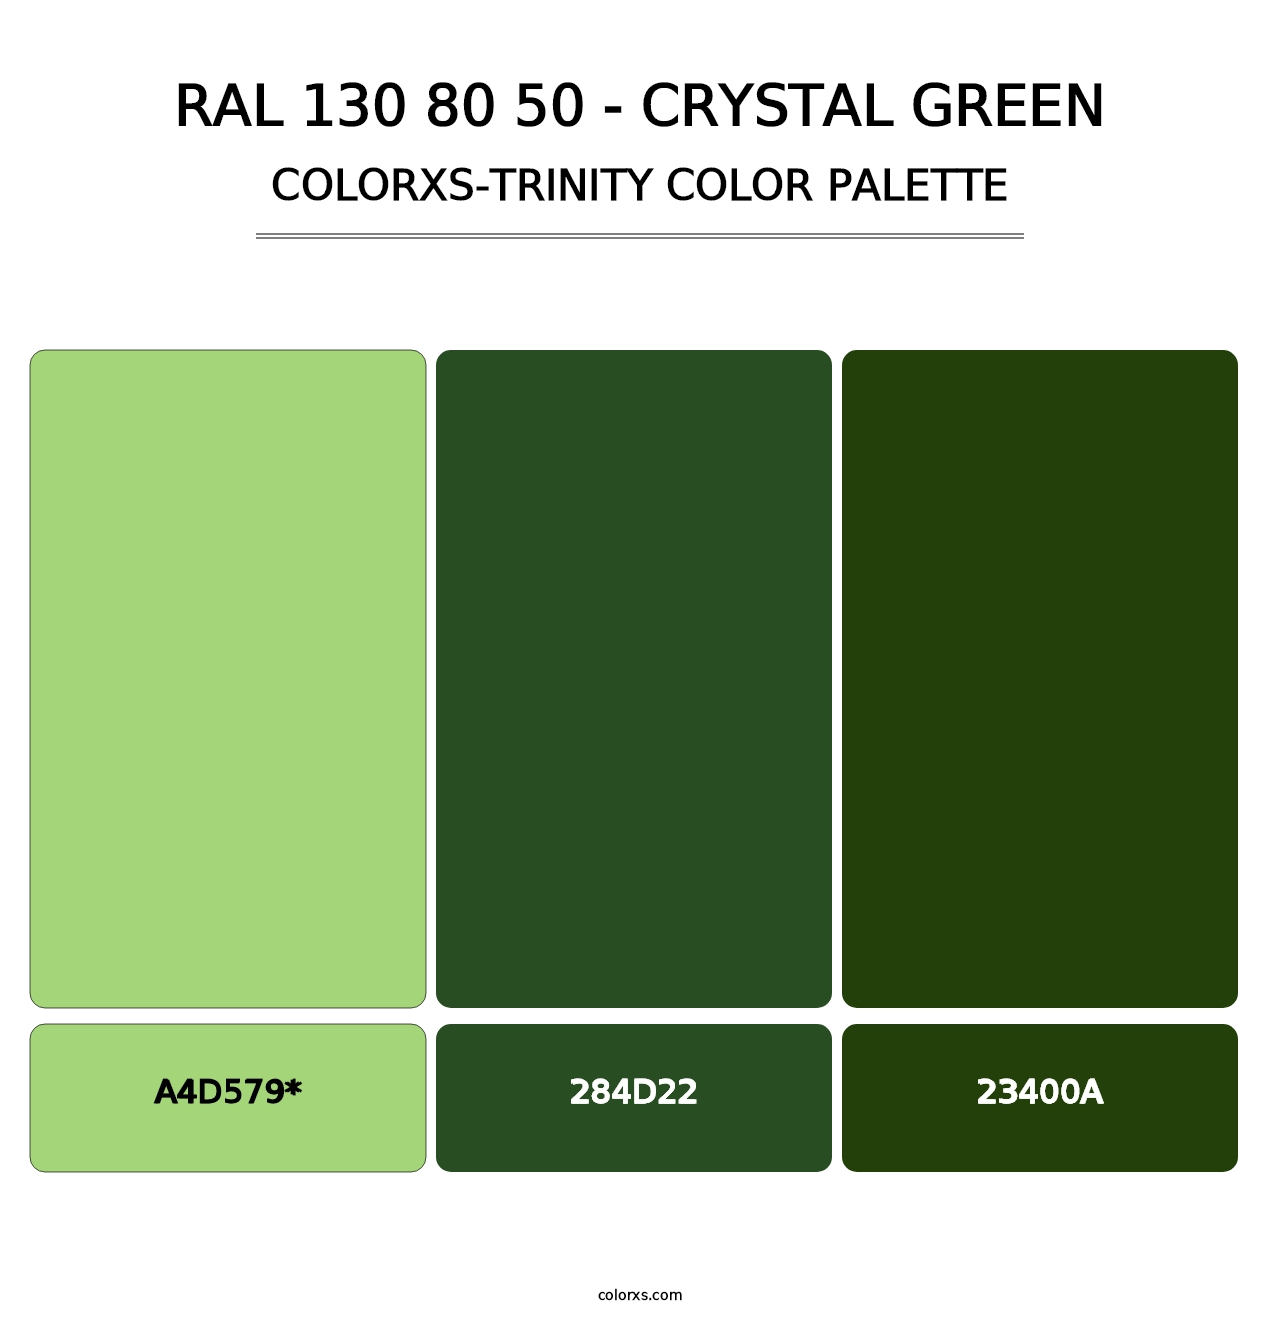 RAL 130 80 50 - Crystal Green - Colorxs Trinity Palette